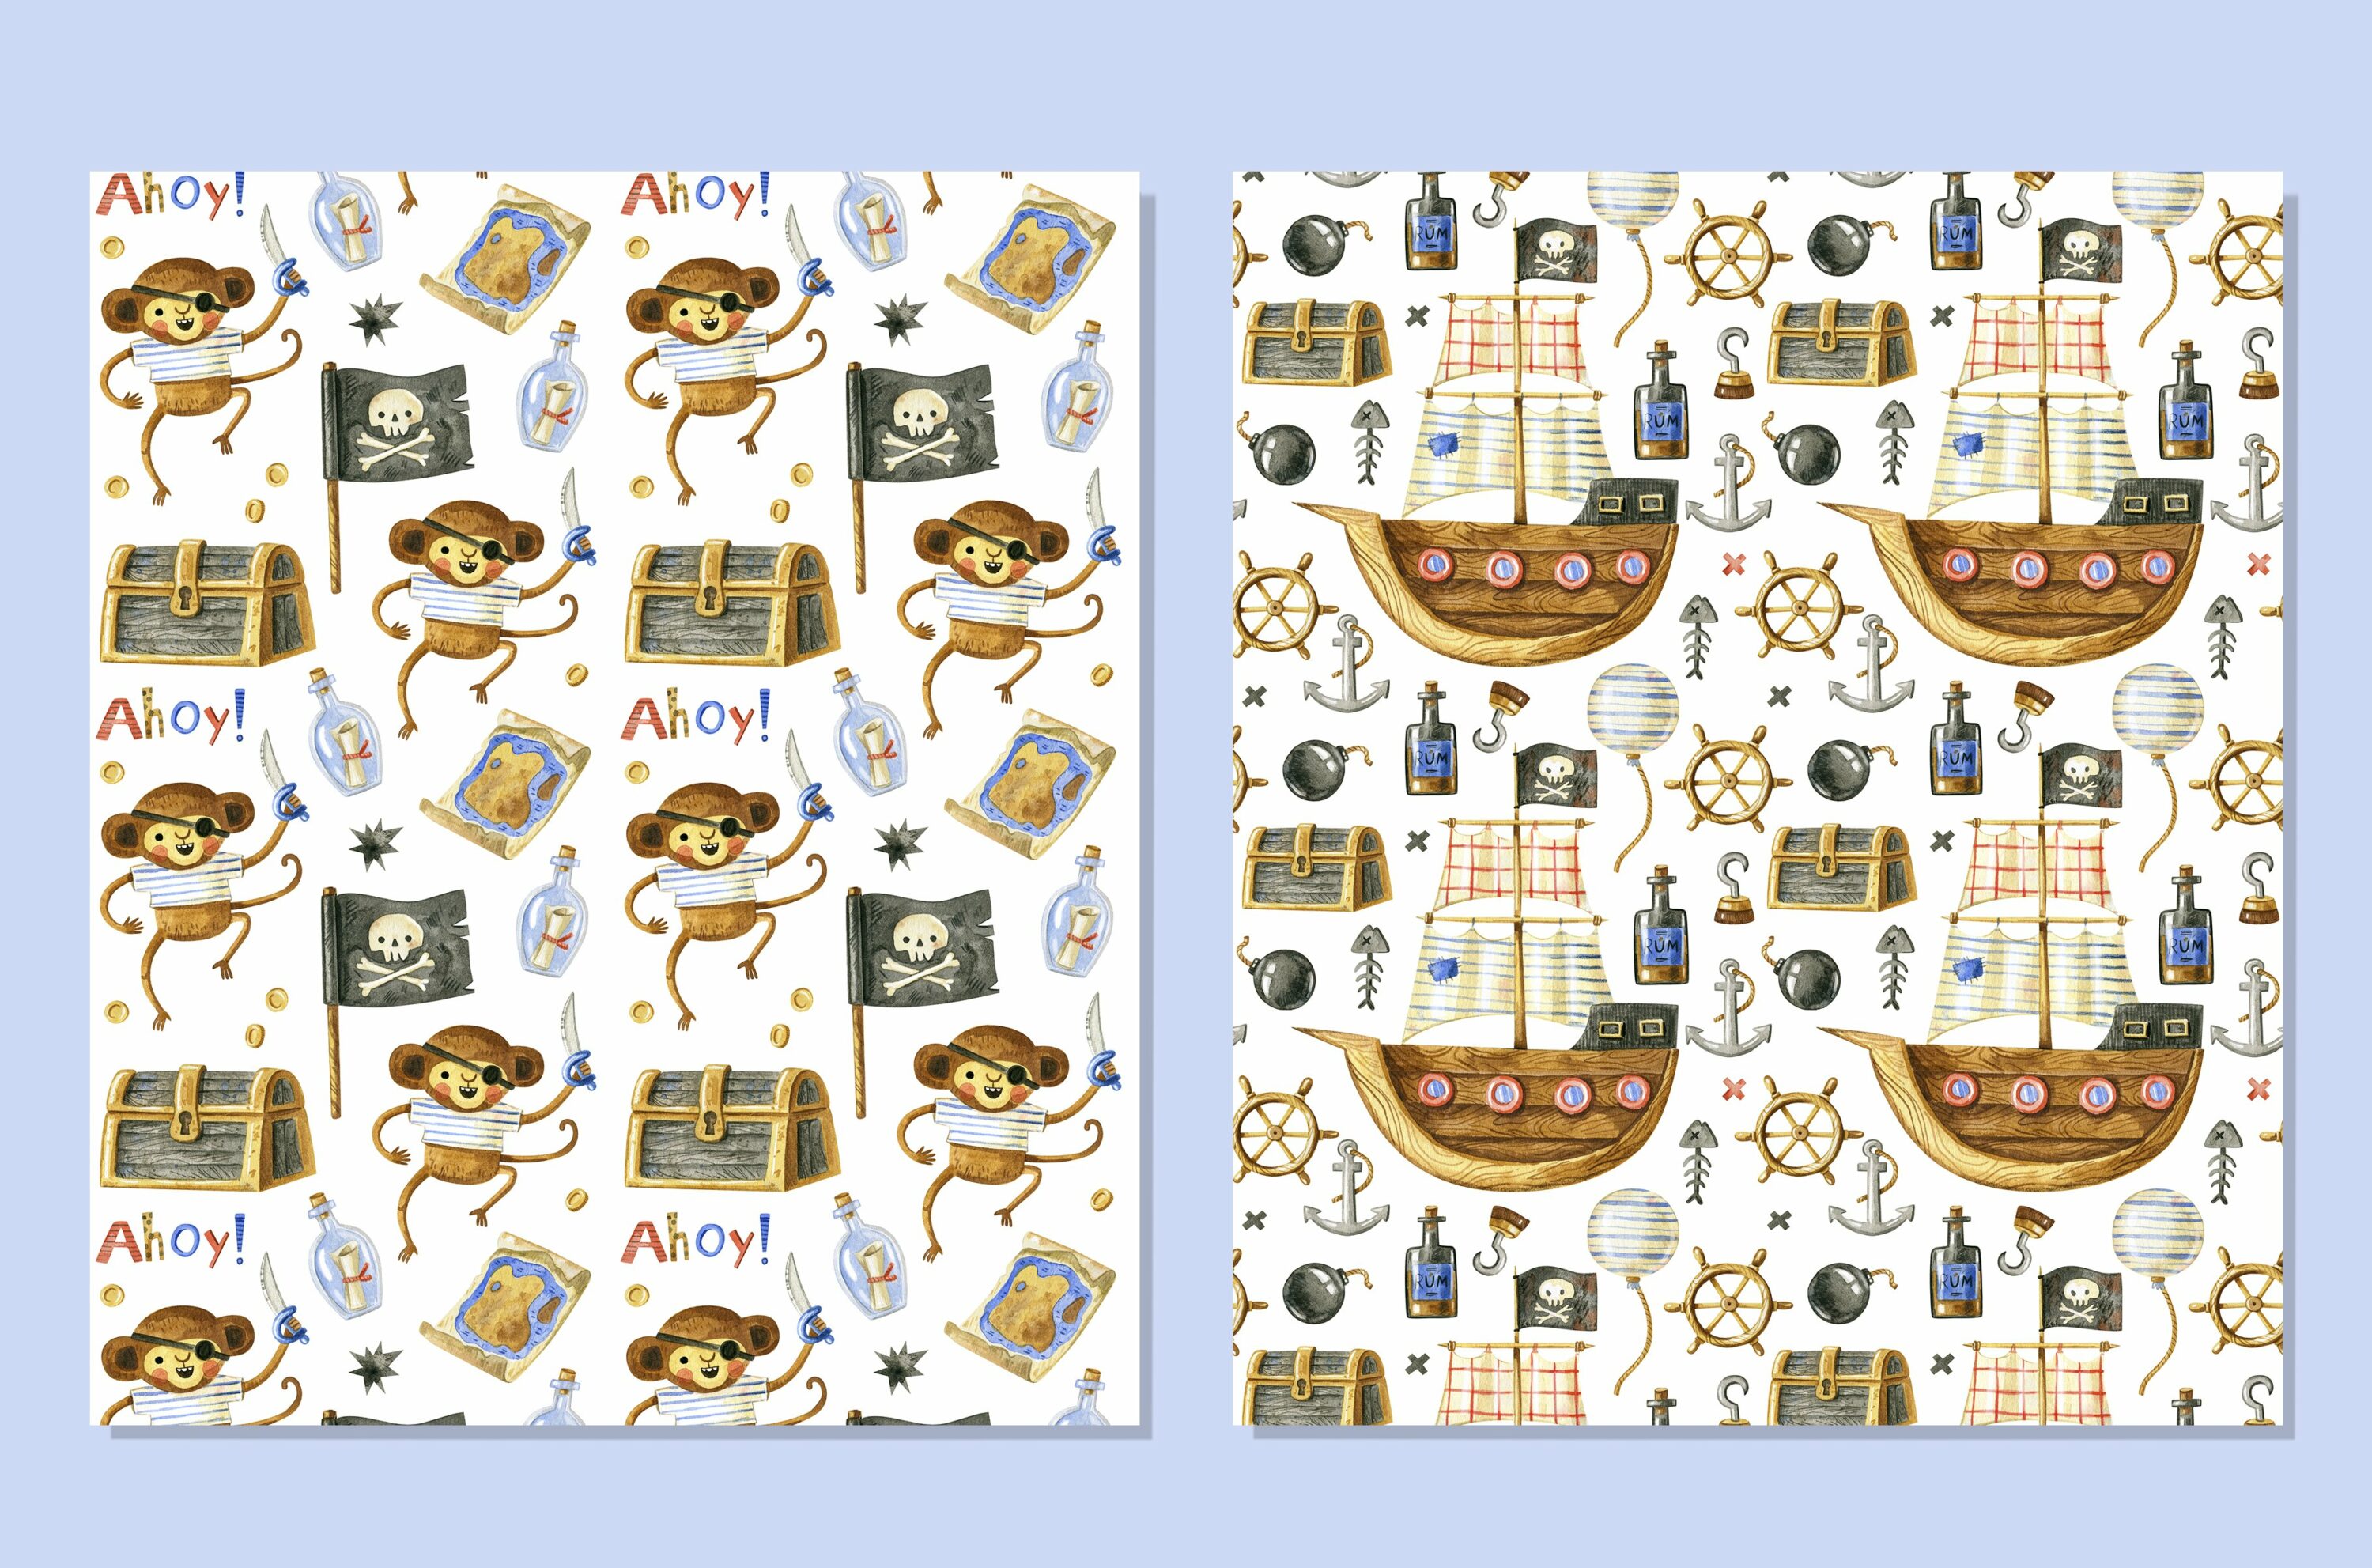 Classic sea prints in a light brown color with ships. pirates, fish and gold.